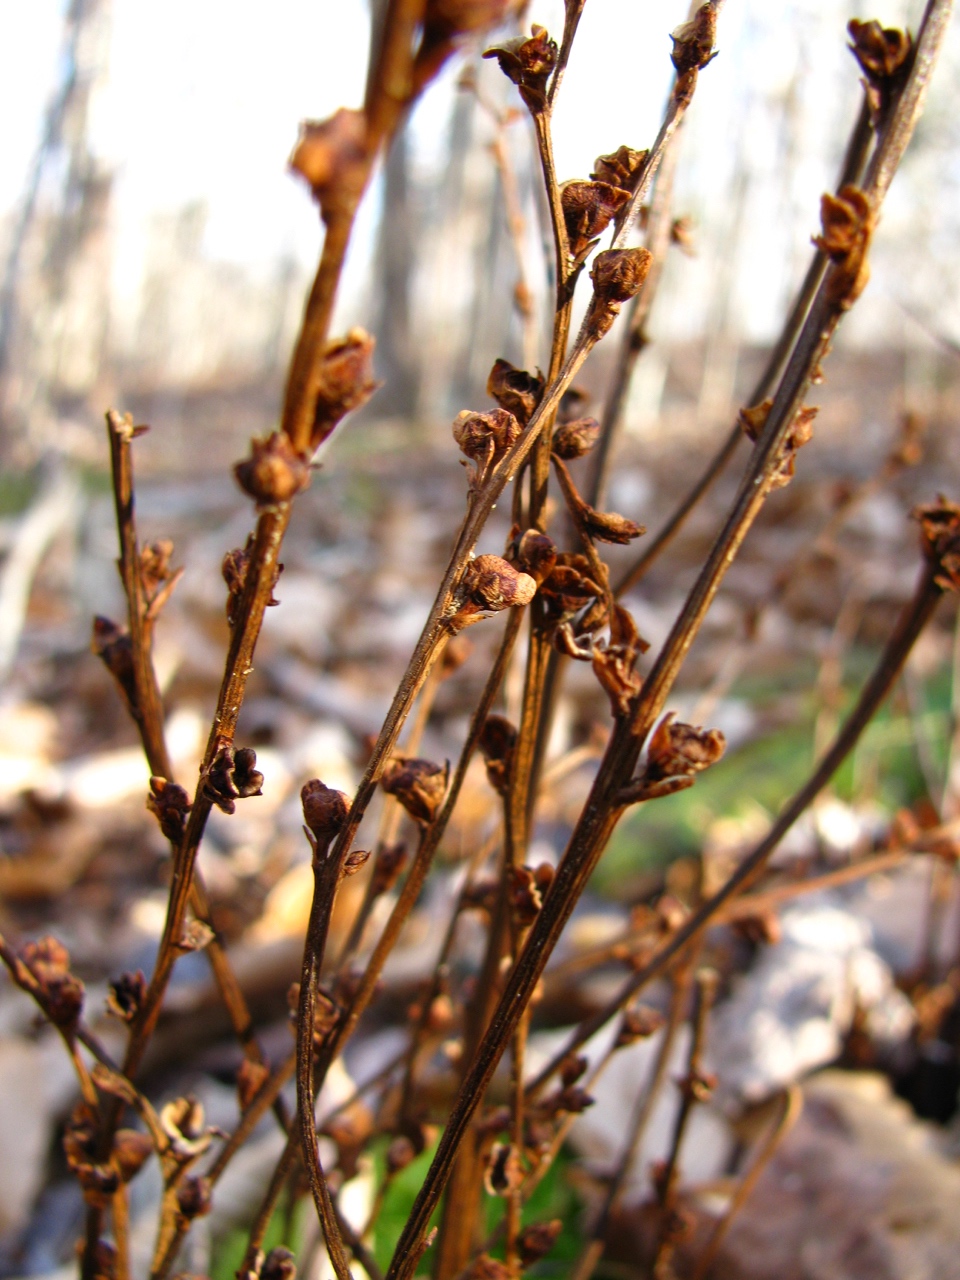 The Scientific Name is Epifagus virginiana. You will likely hear them called Beechdrops, Beech-drops. This picture shows the Last year's dried stems  of Epifagus virginiana